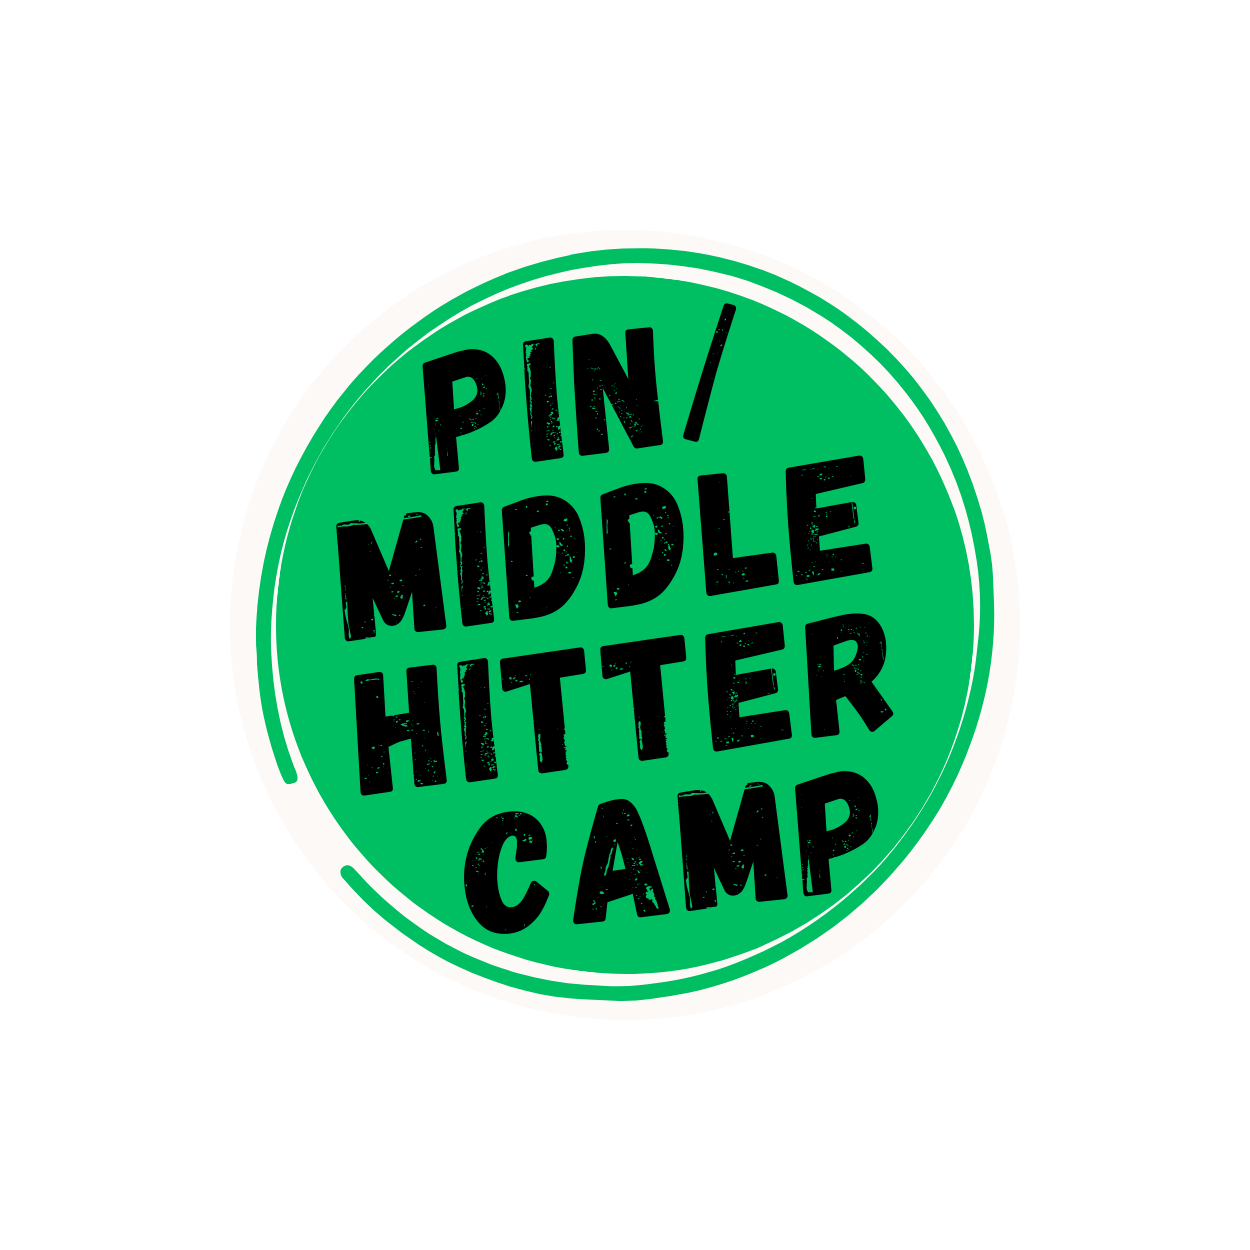 Pin:middle camp image